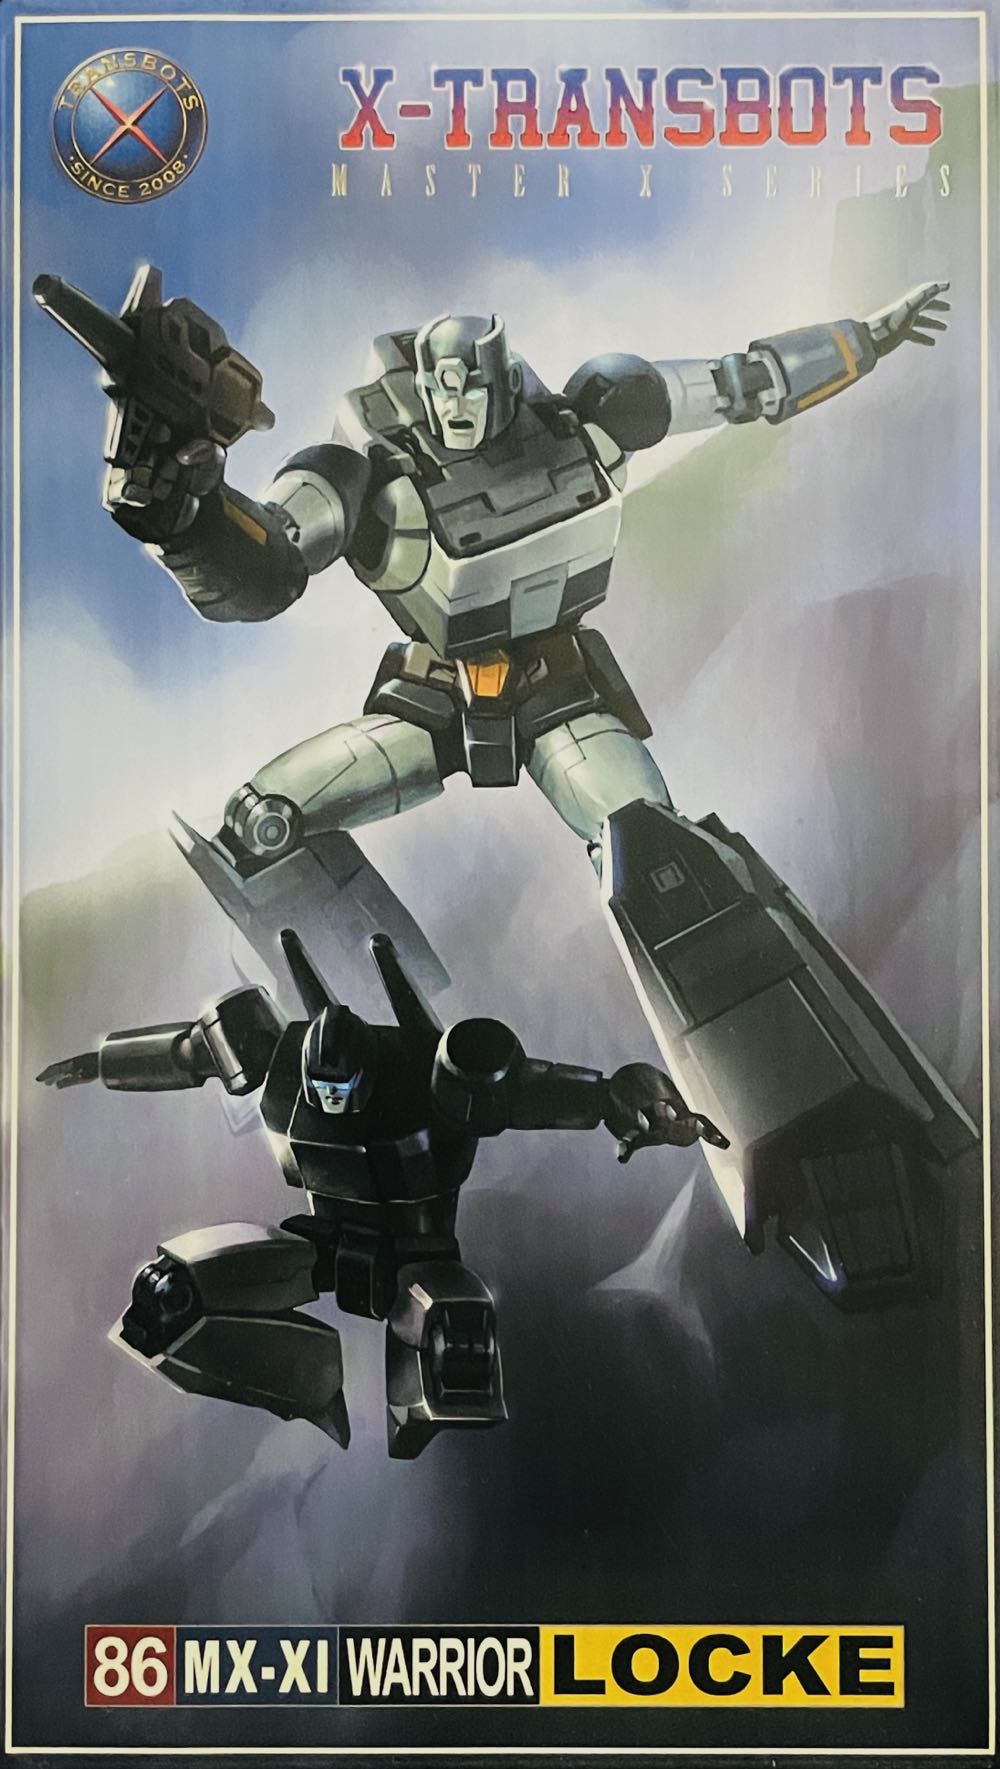 X-Transbots Locke - X-Transbots (The Transformers) action figure collectible - Main Image 4